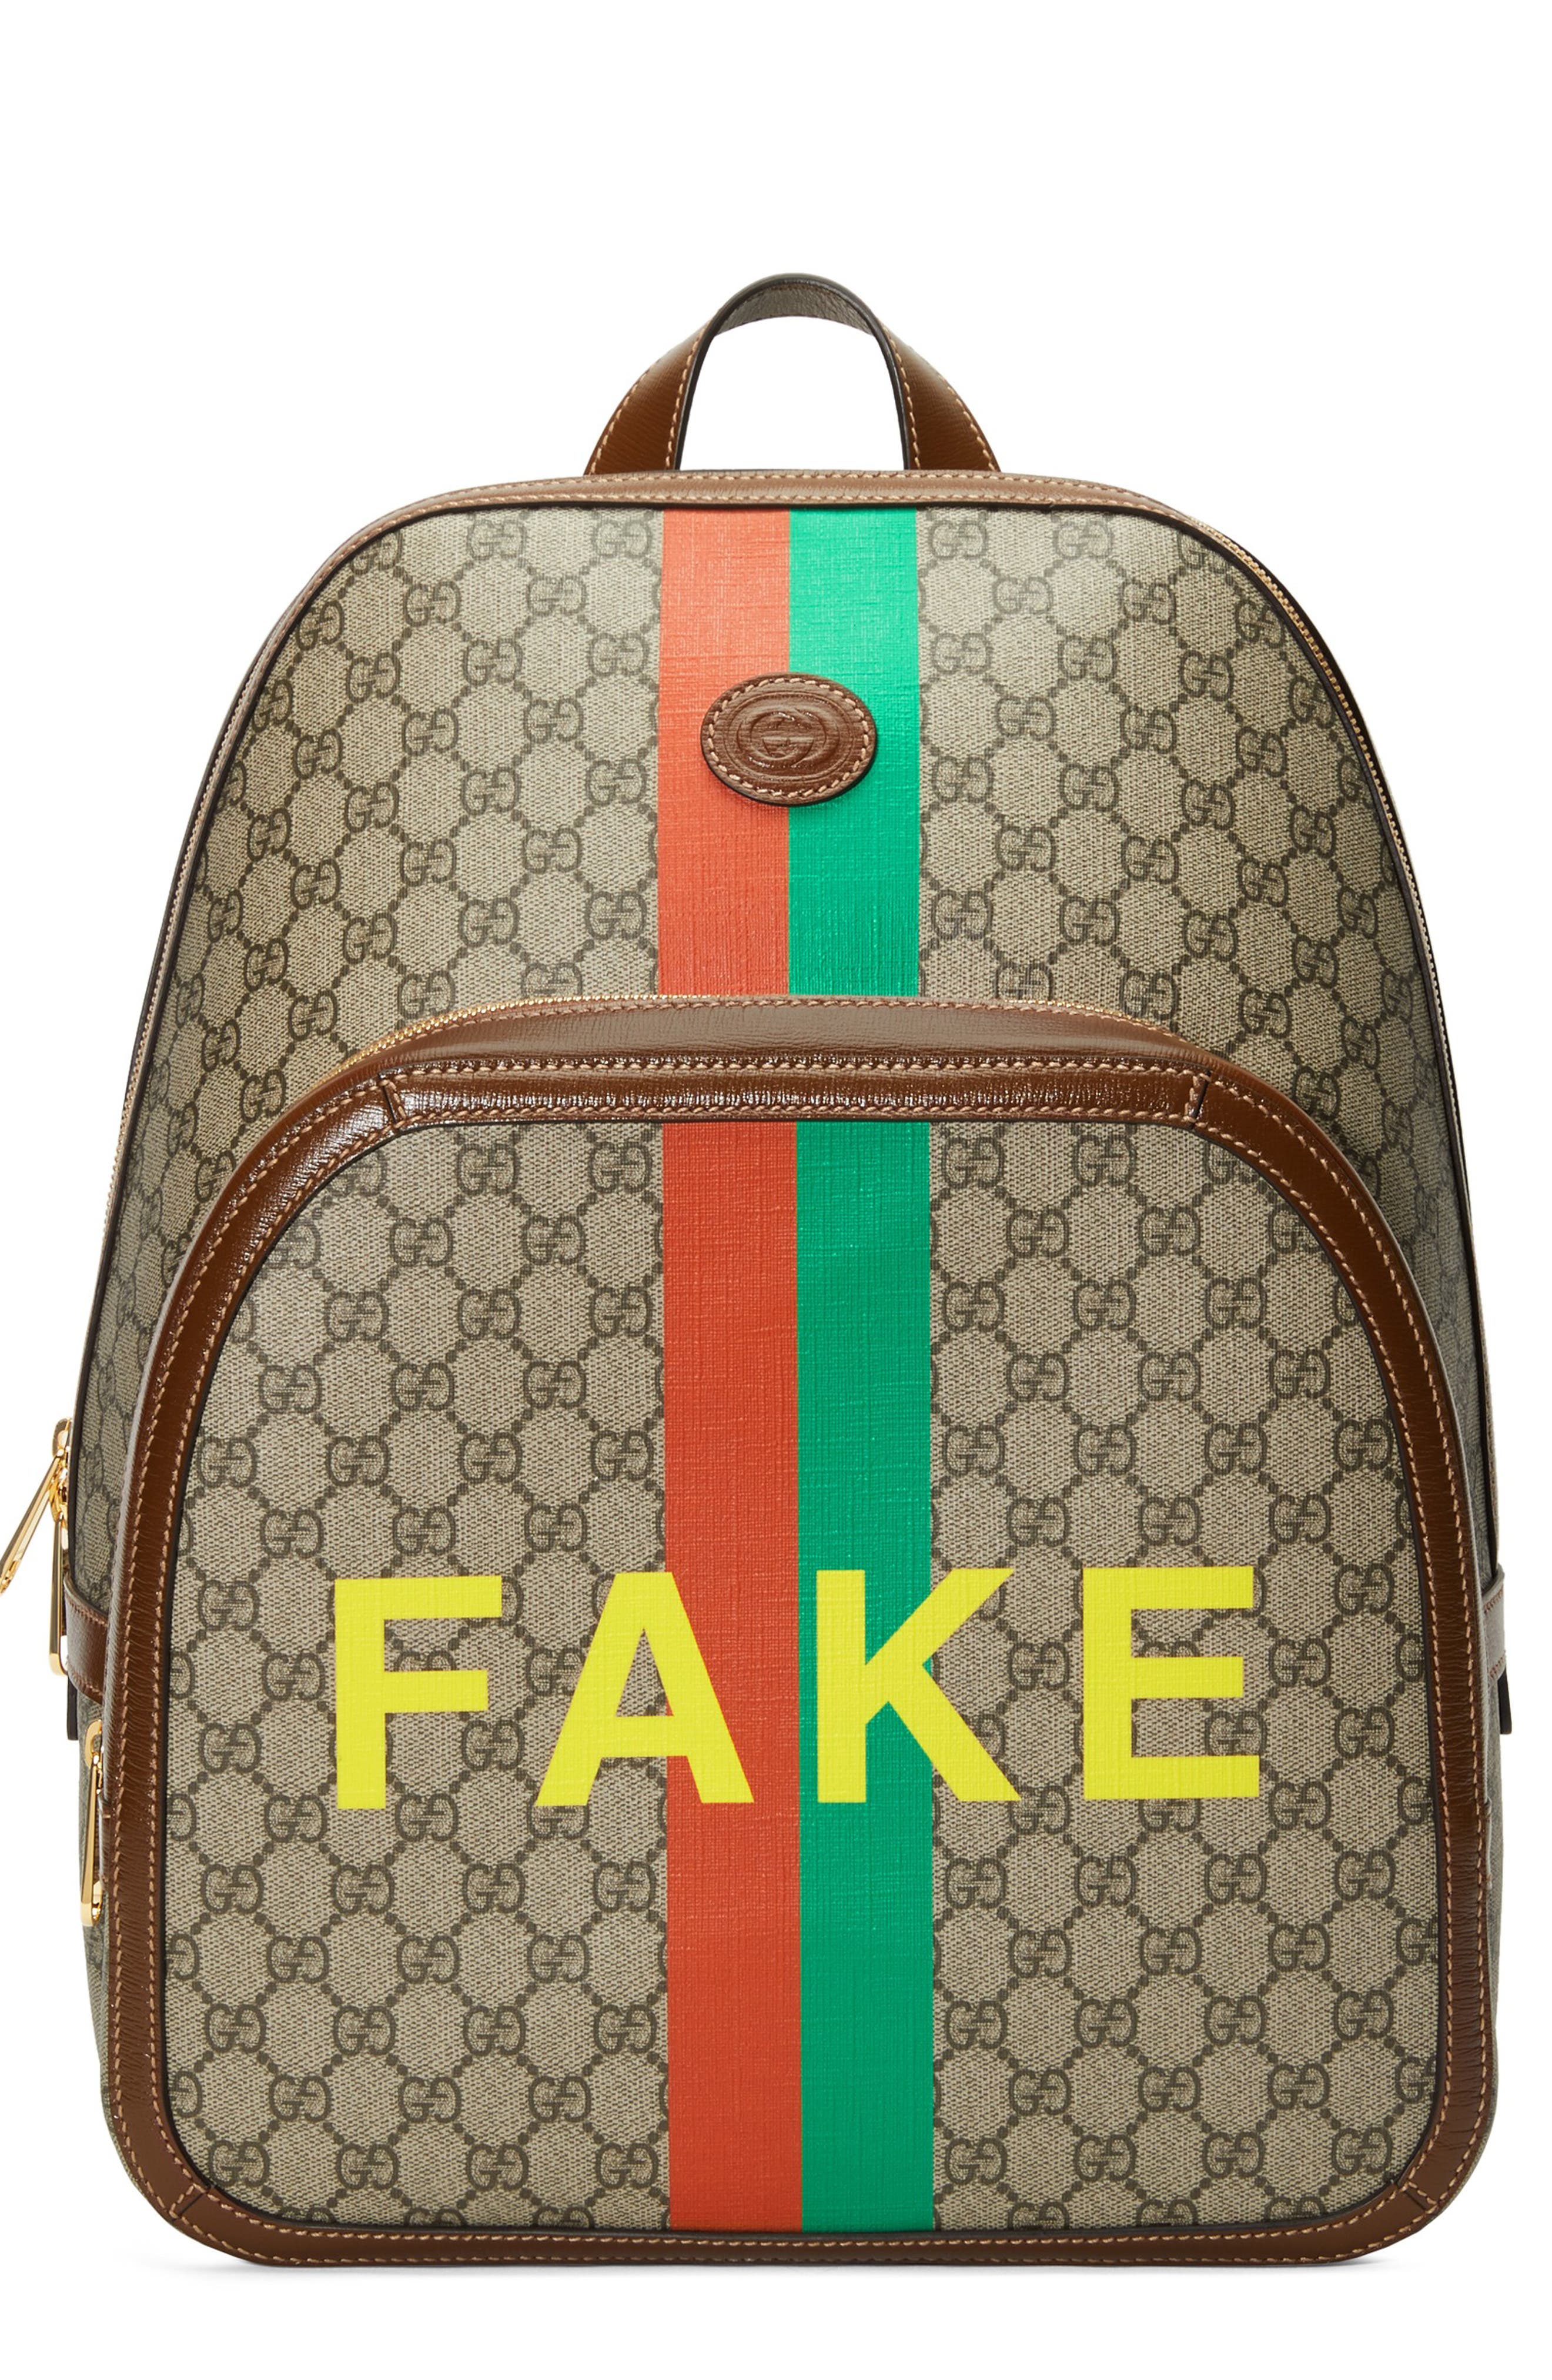 gucci backpack new collection